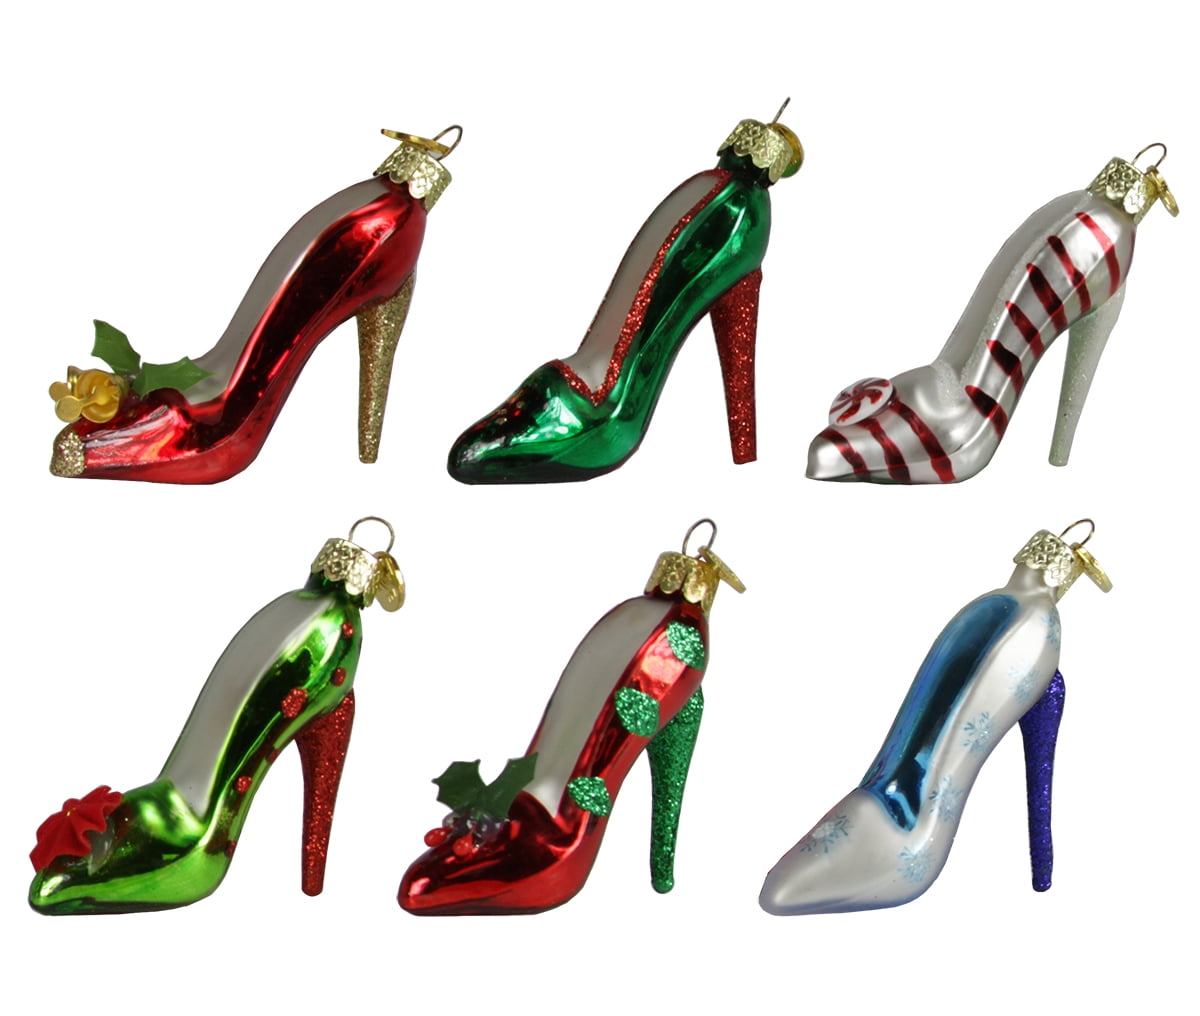 Ornaments Details about Glittered Ornate Stiletto Shoe Hanging Ornament ...